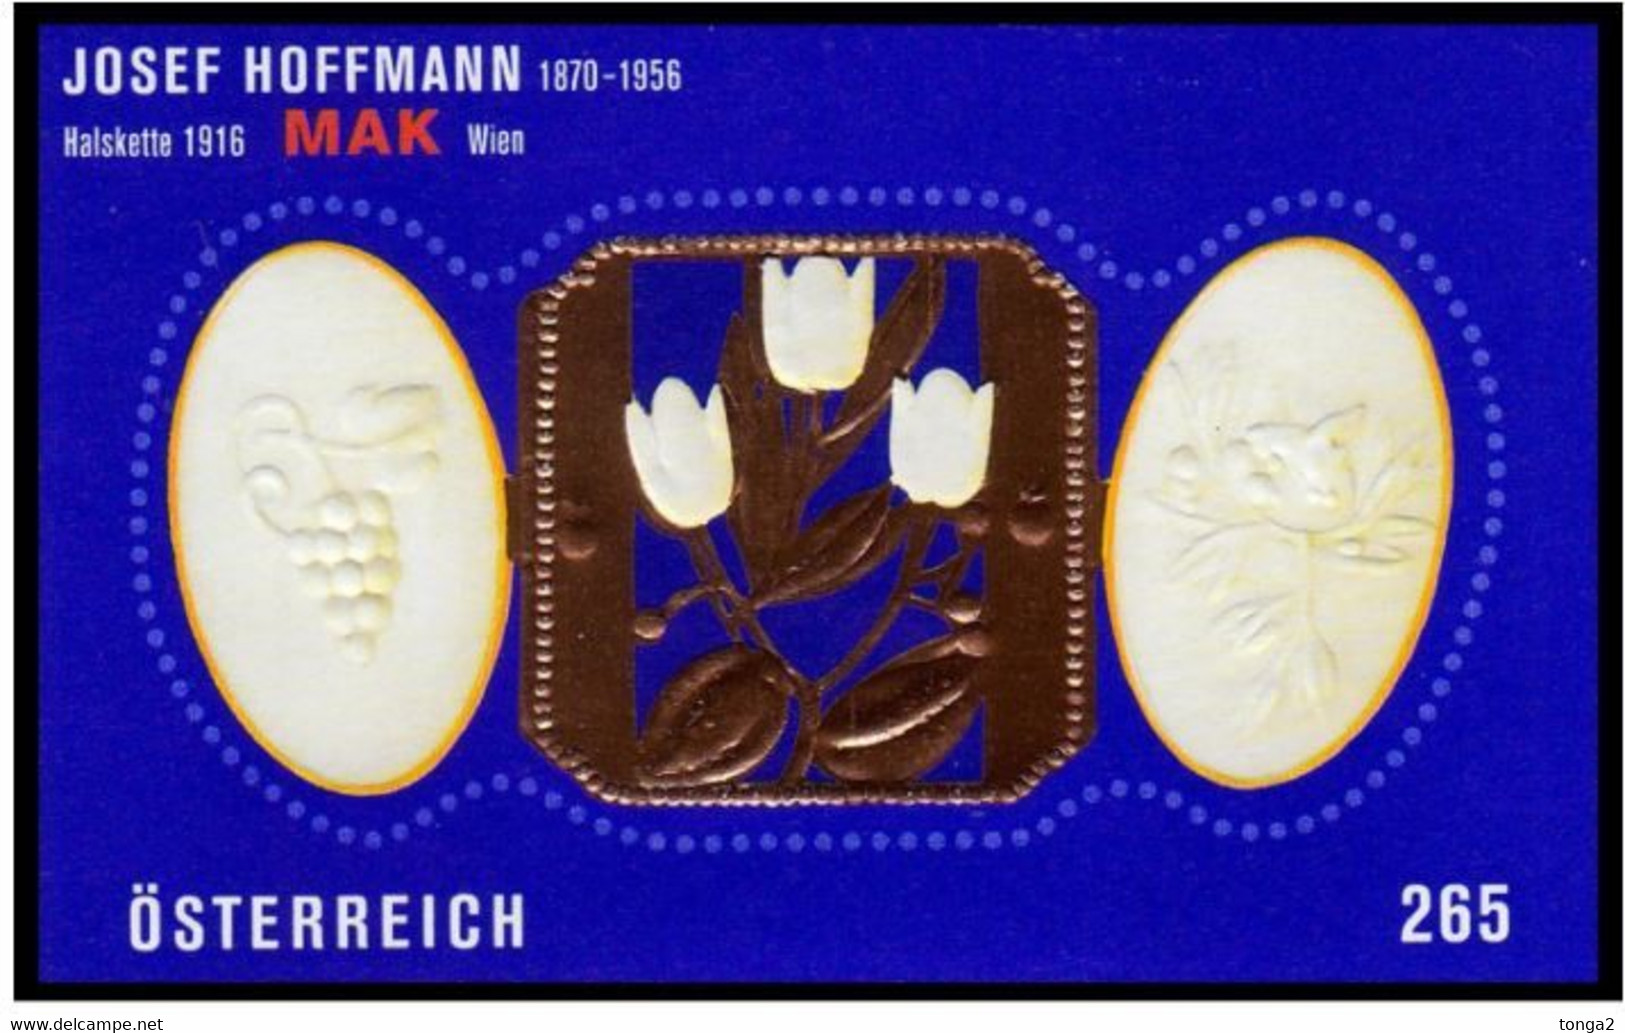 Austria 2007 Hoffmann Stamp With 22 Carat Gold Affixed - Unusual - Ologrammi